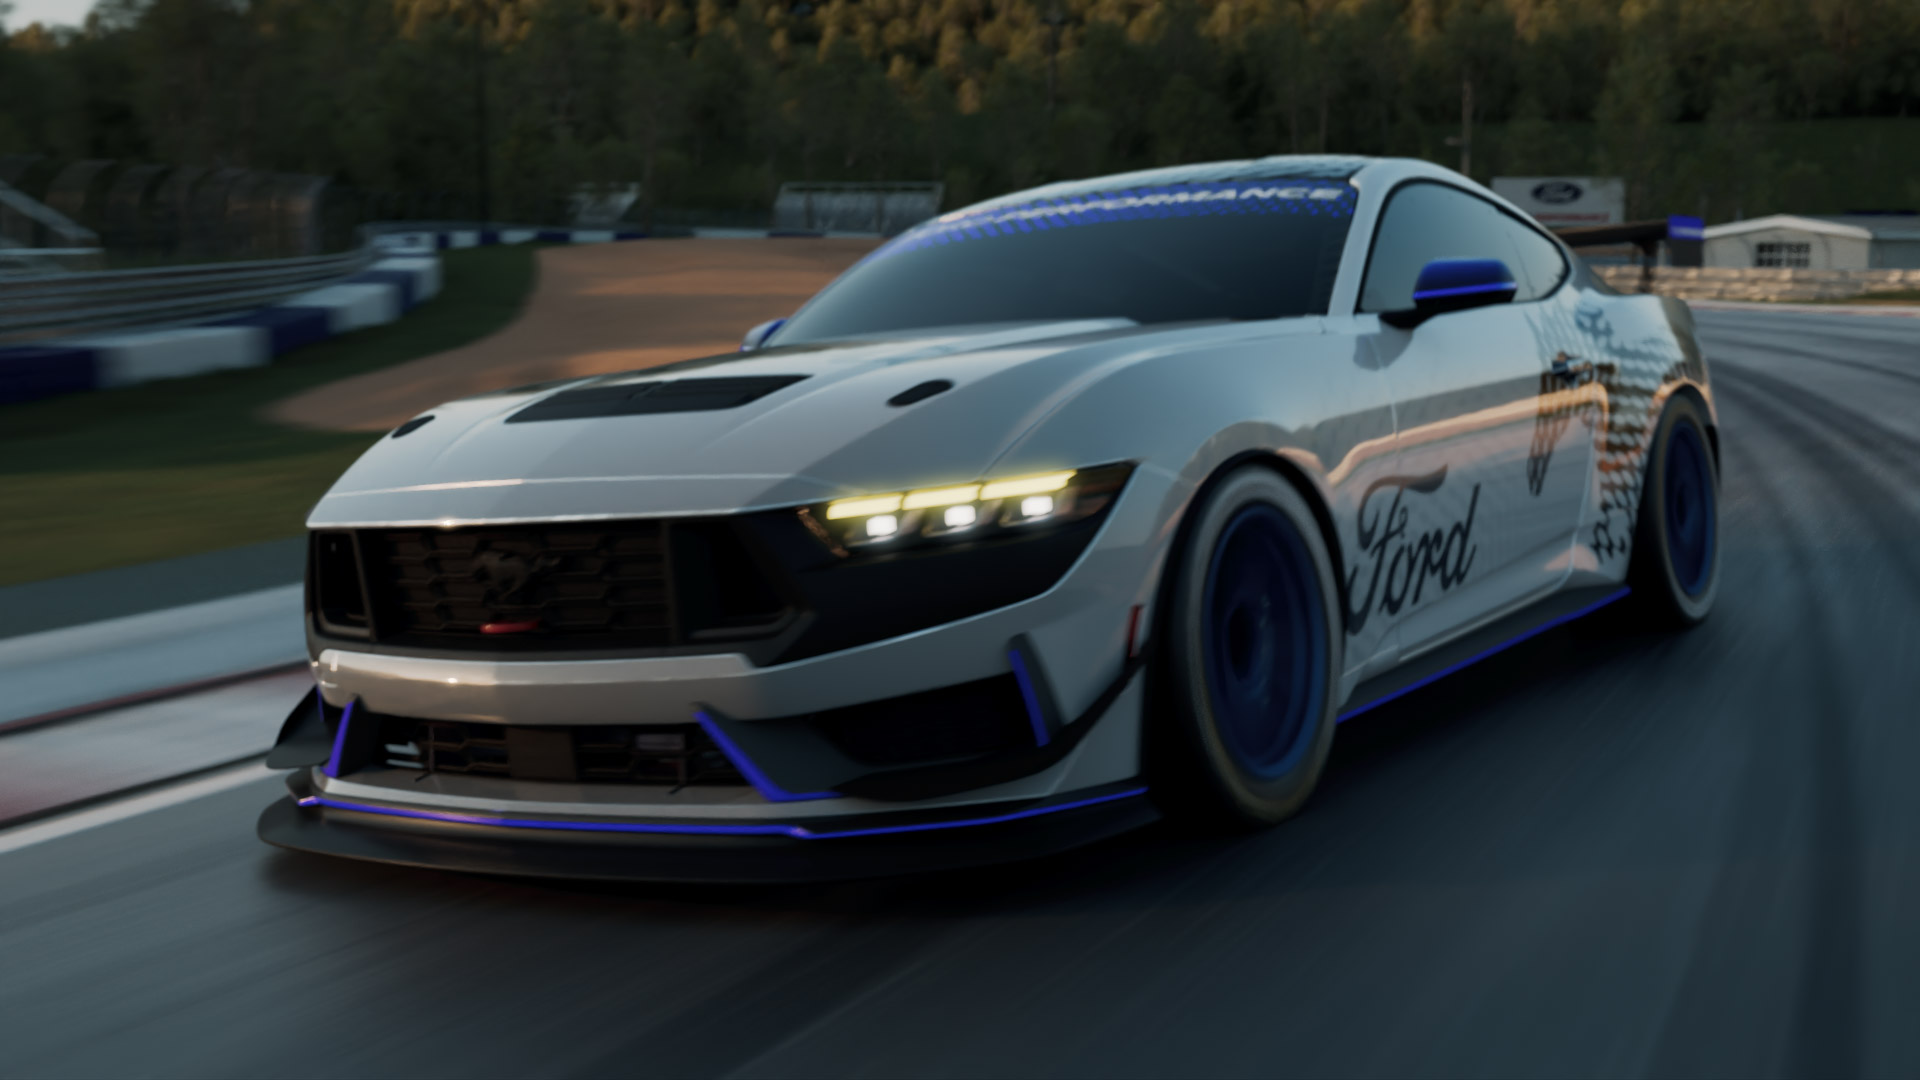 S650 Mustang Ford Debuts Next-Gen Mustang GT3, GT4, Supercars and Factory X Race Cars Mustang GT4 01